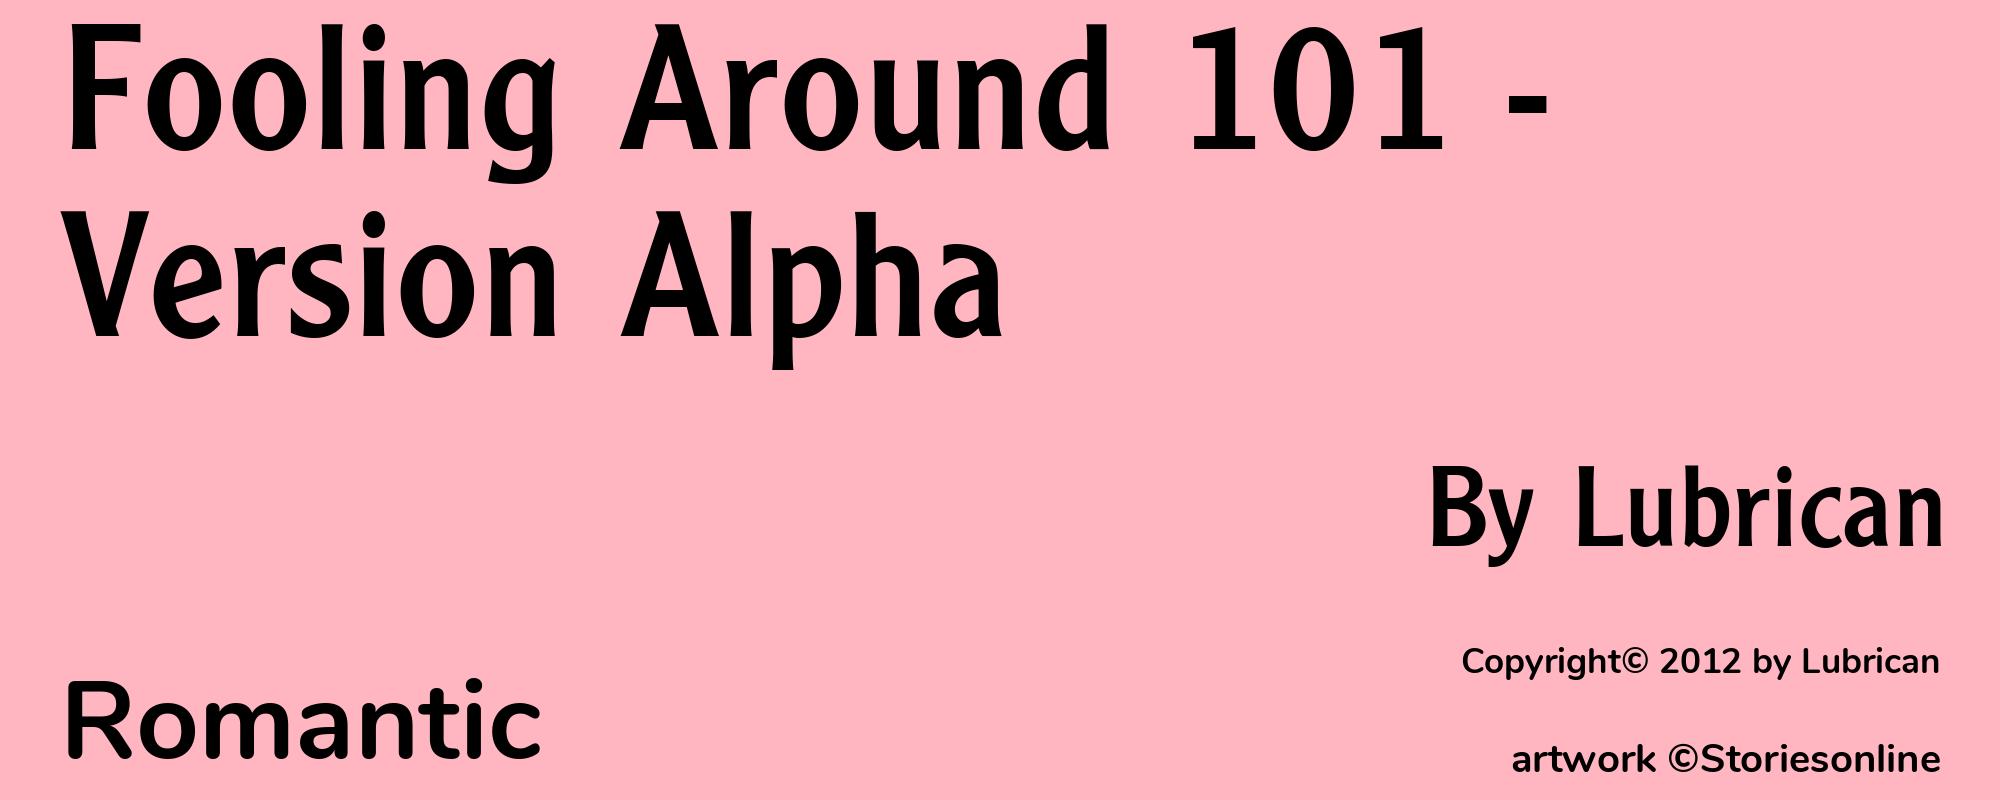 Fooling Around 101 - Version Alpha - Cover